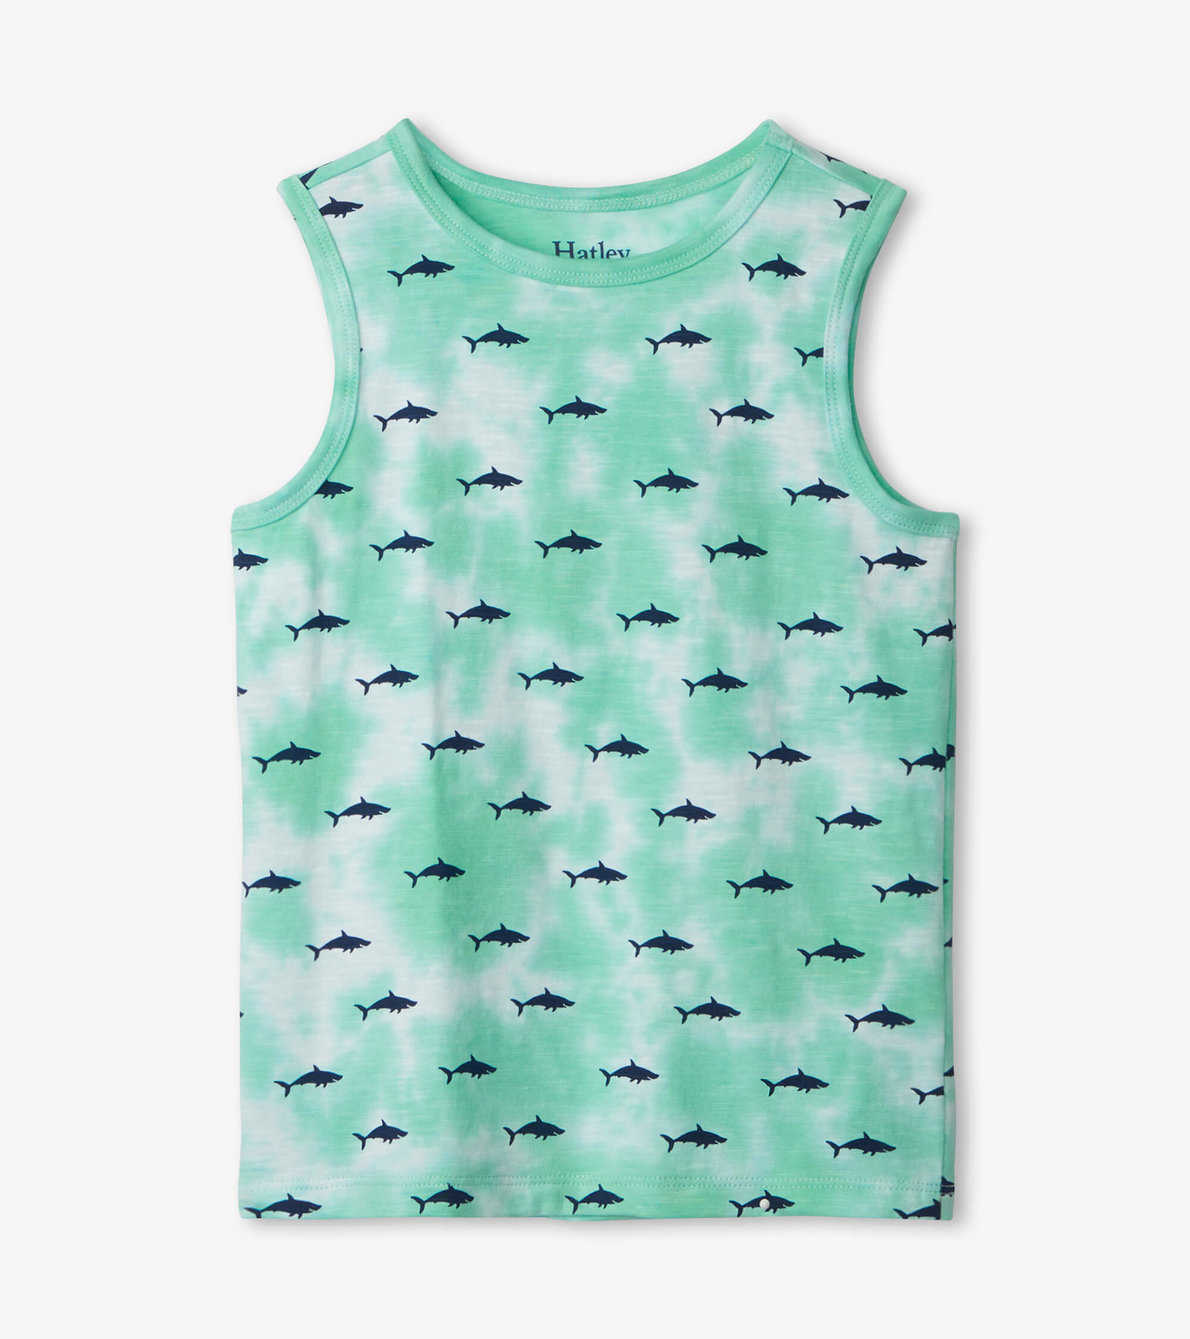 View larger image of Silhouette Sharks Tank Top